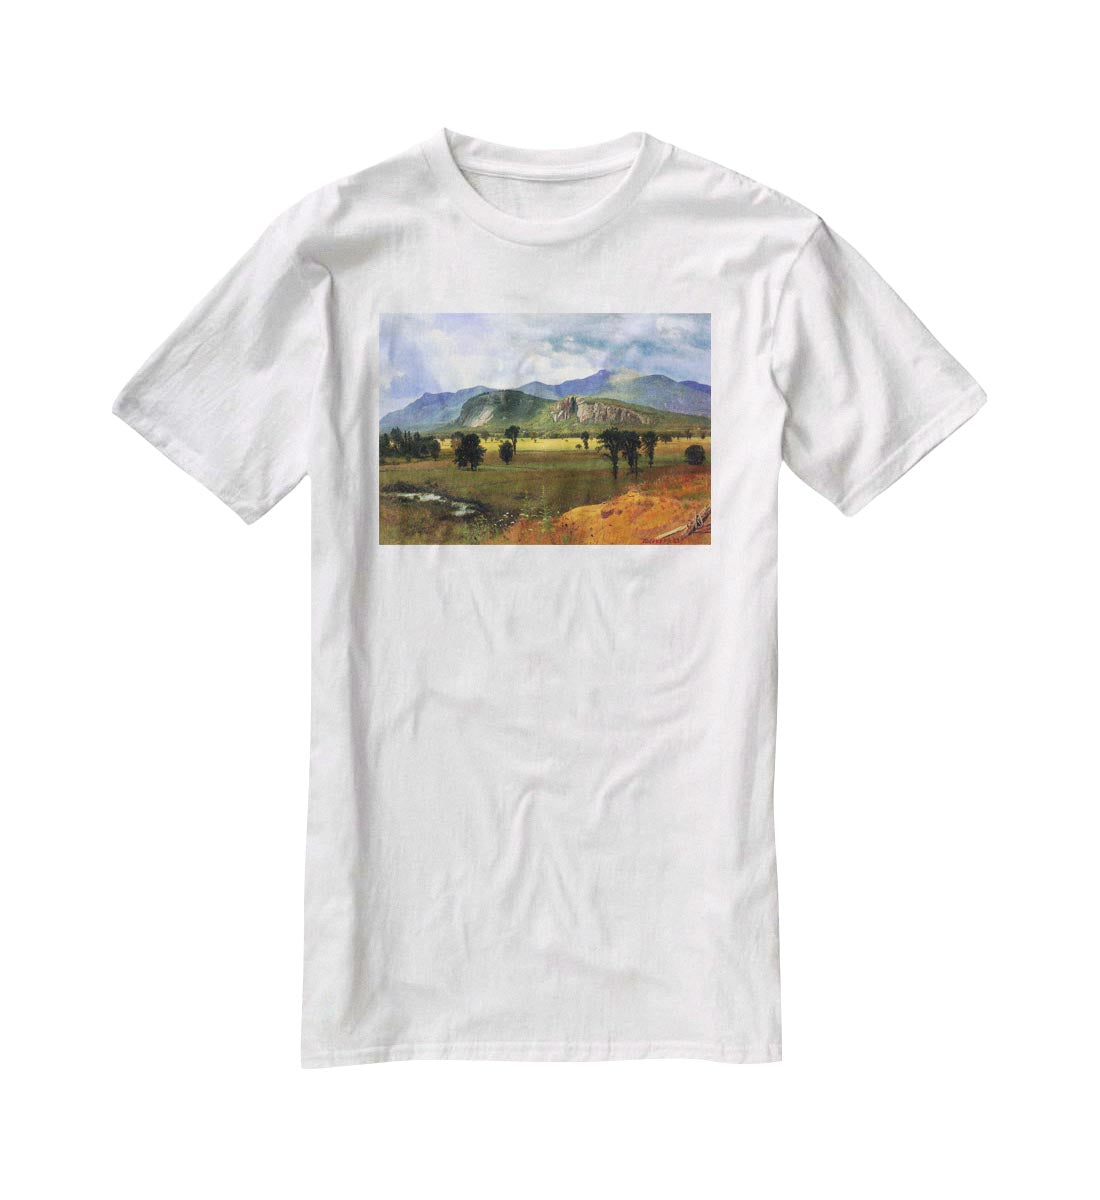 Moat Mountain Intervale New Hampshire by Bierstadt T-Shirt - Canvas Art Rocks - 5